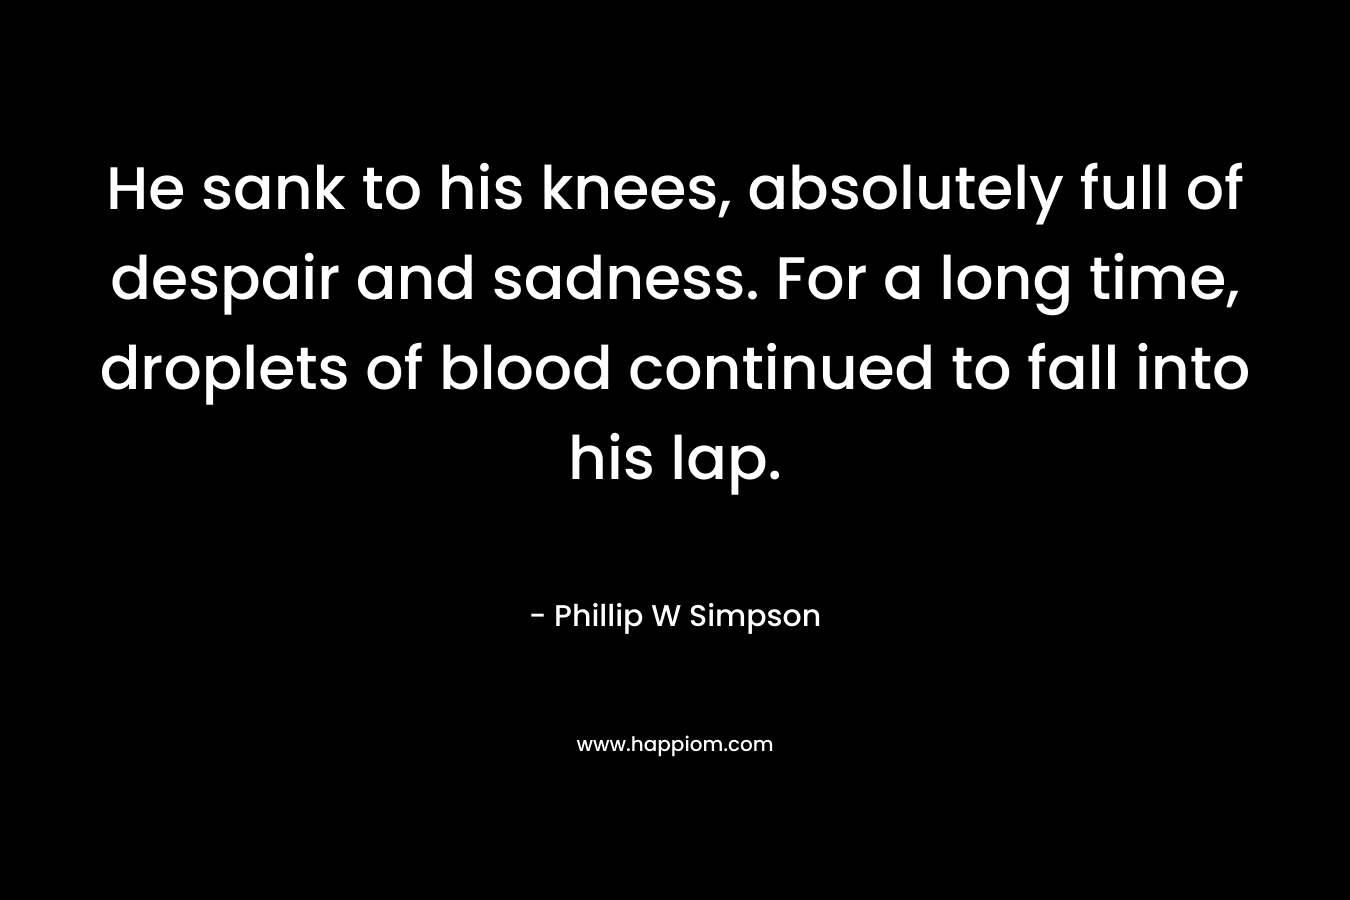 He sank to his knees, absolutely full of despair and sadness. For a long time, droplets of blood continued to fall into his lap. – Phillip W Simpson